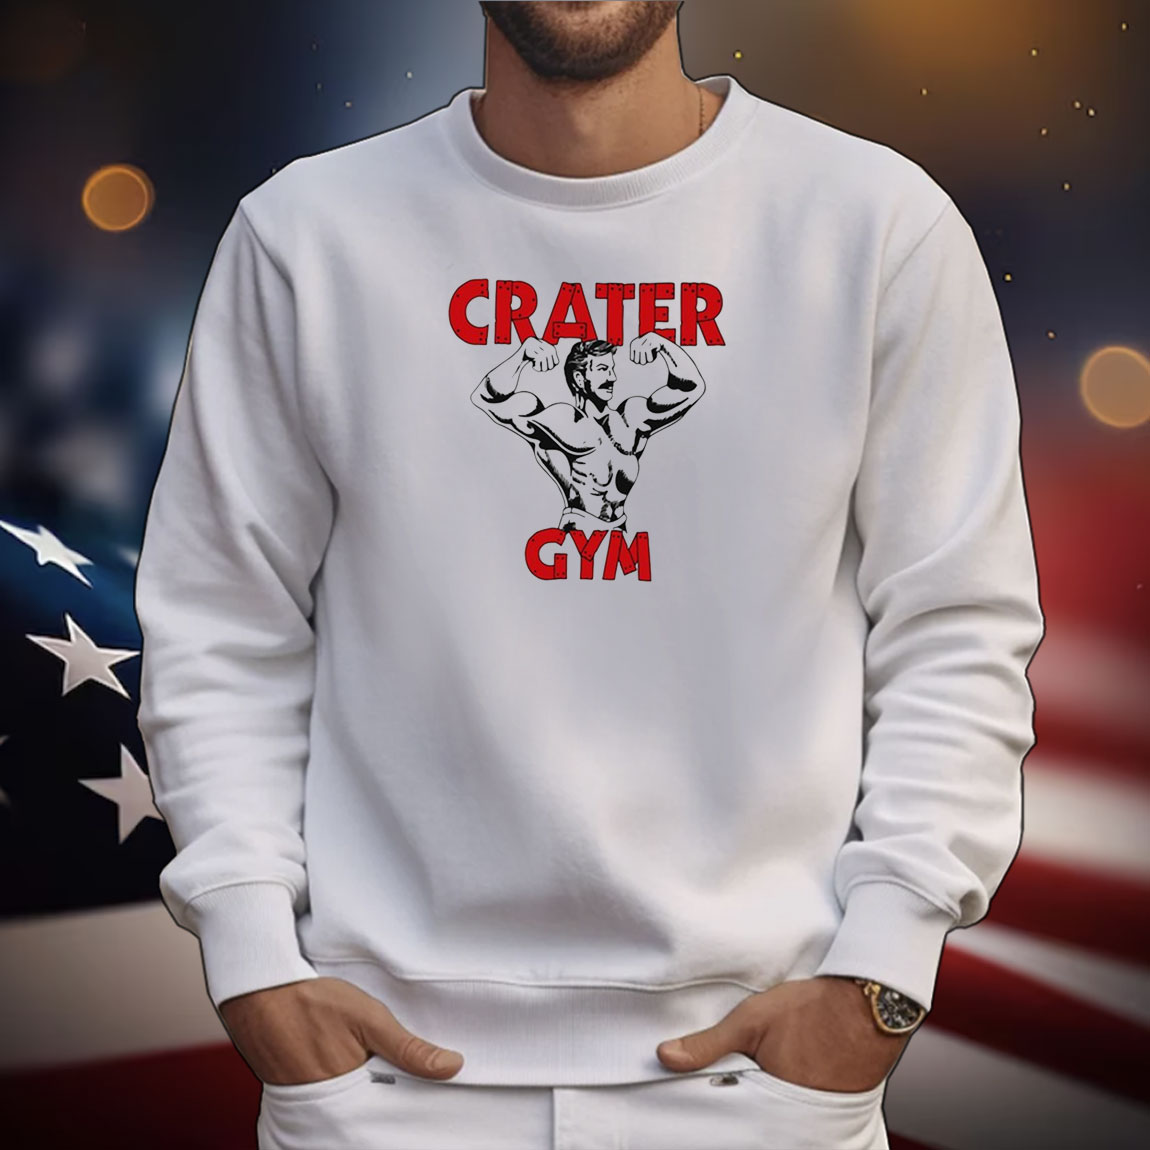 Crater Gym Staff Tee Shirts